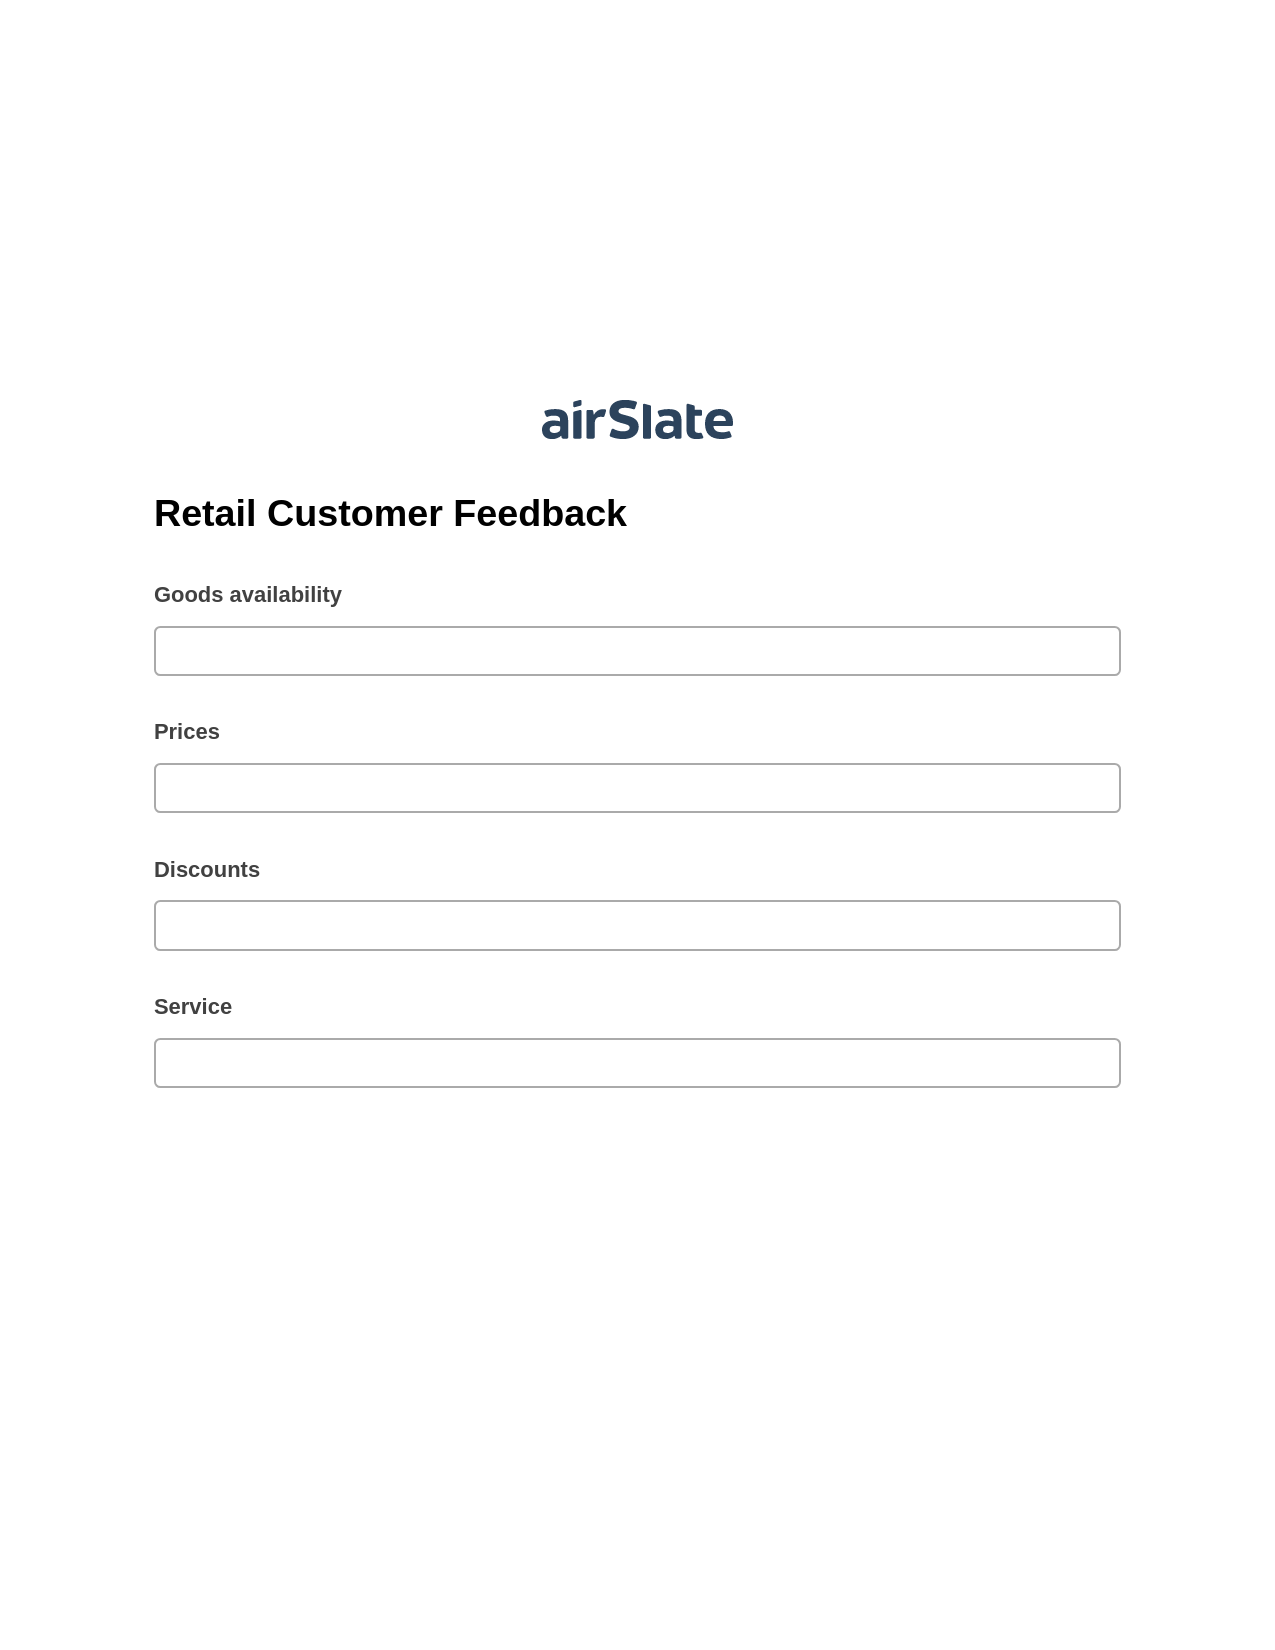 Retail Customer Feedback Pre-fill from another Slate Bot, Create QuickBooks invoice Bot, Export to Smartsheet